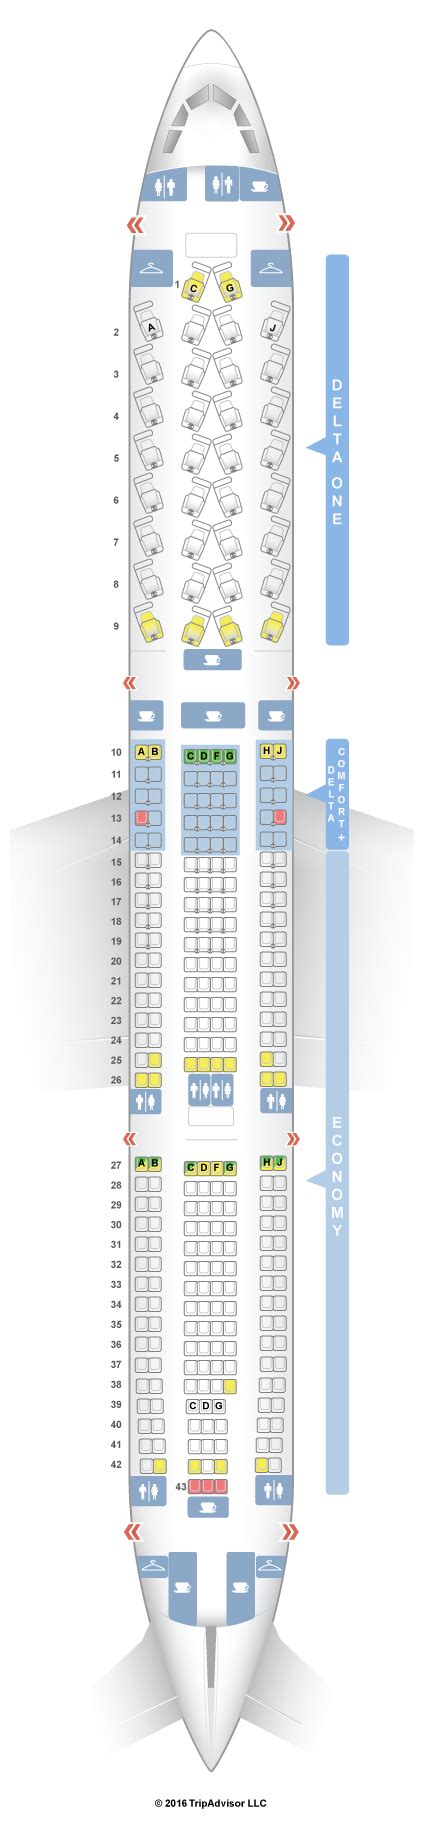 56 reviews. 126 helpful votes. 6. Re: Seat configuration Wamos A330 200. 8 Mar 2023, 5:01 am. Save. The registration of this aircraft is EC-NCK on the most recent flights that have operated between Perth and Auckland. This link will take you to the WAMOS data sheets with an idea of seat layout.. 